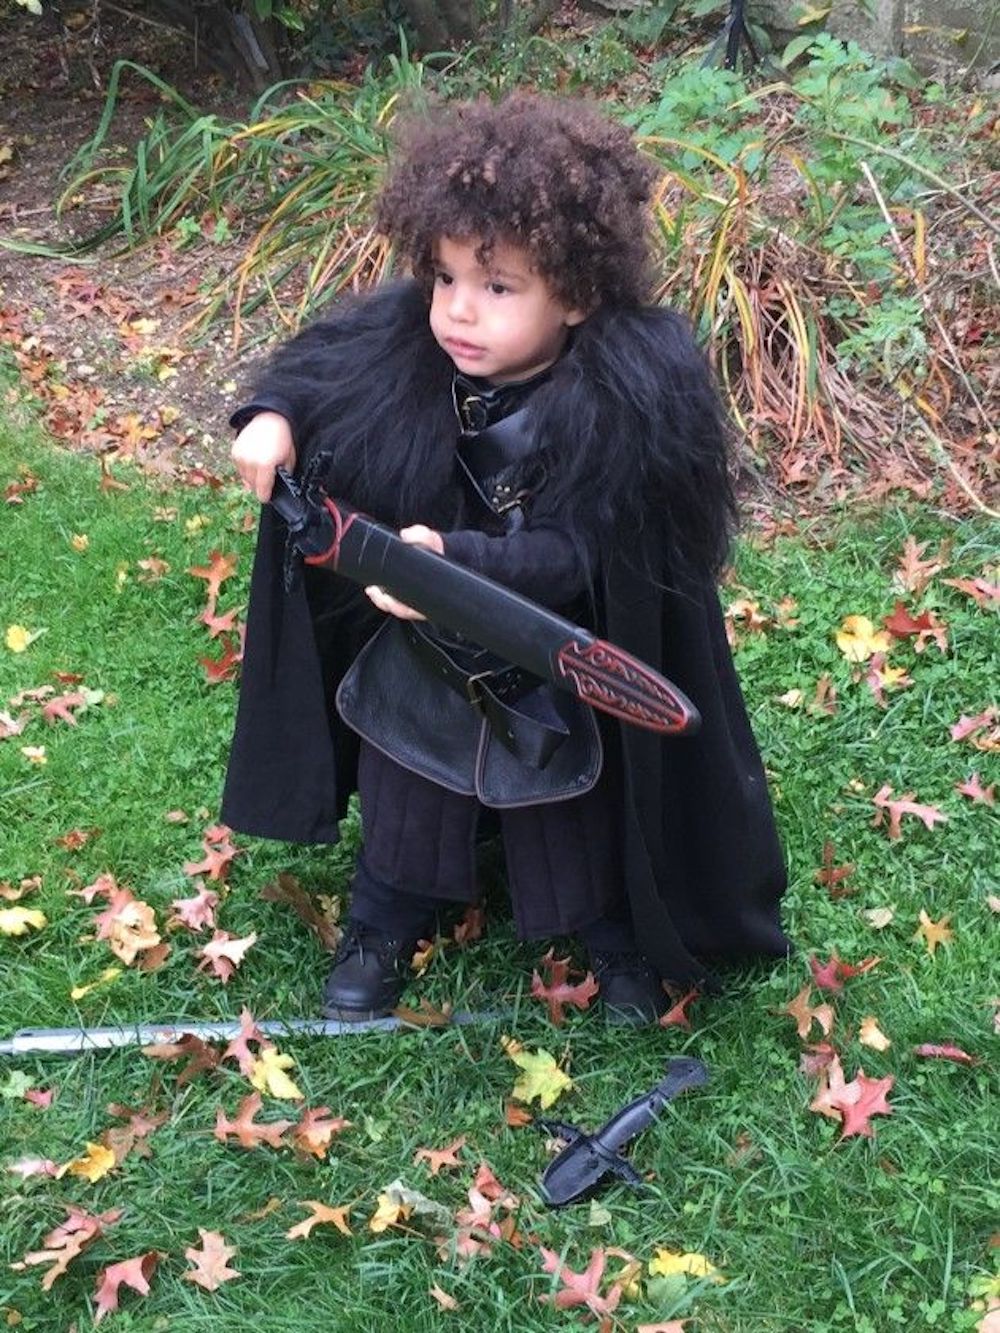 Kids' Game of Thrones costume ideas: How to make a Jon Snow costume on Winter is Coming